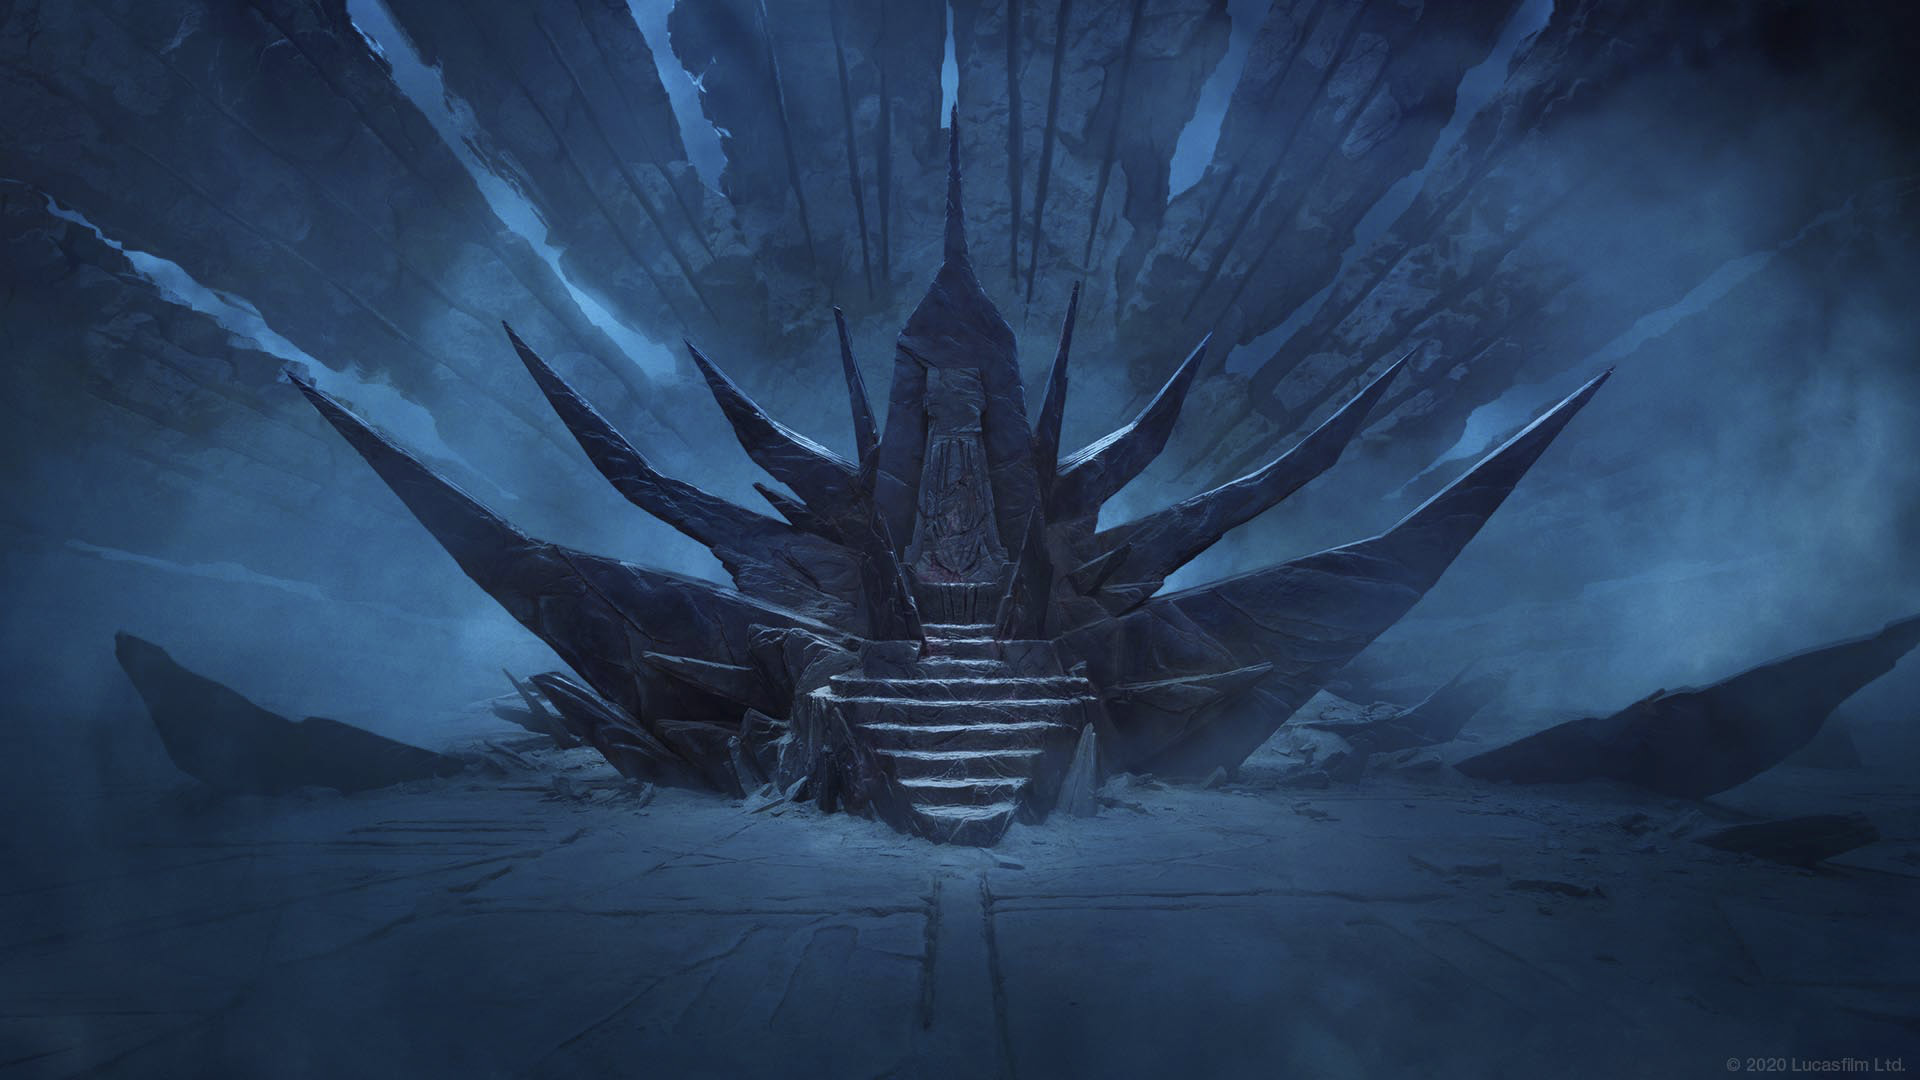 Star Wars 8 - Emperors Throne on Exegol